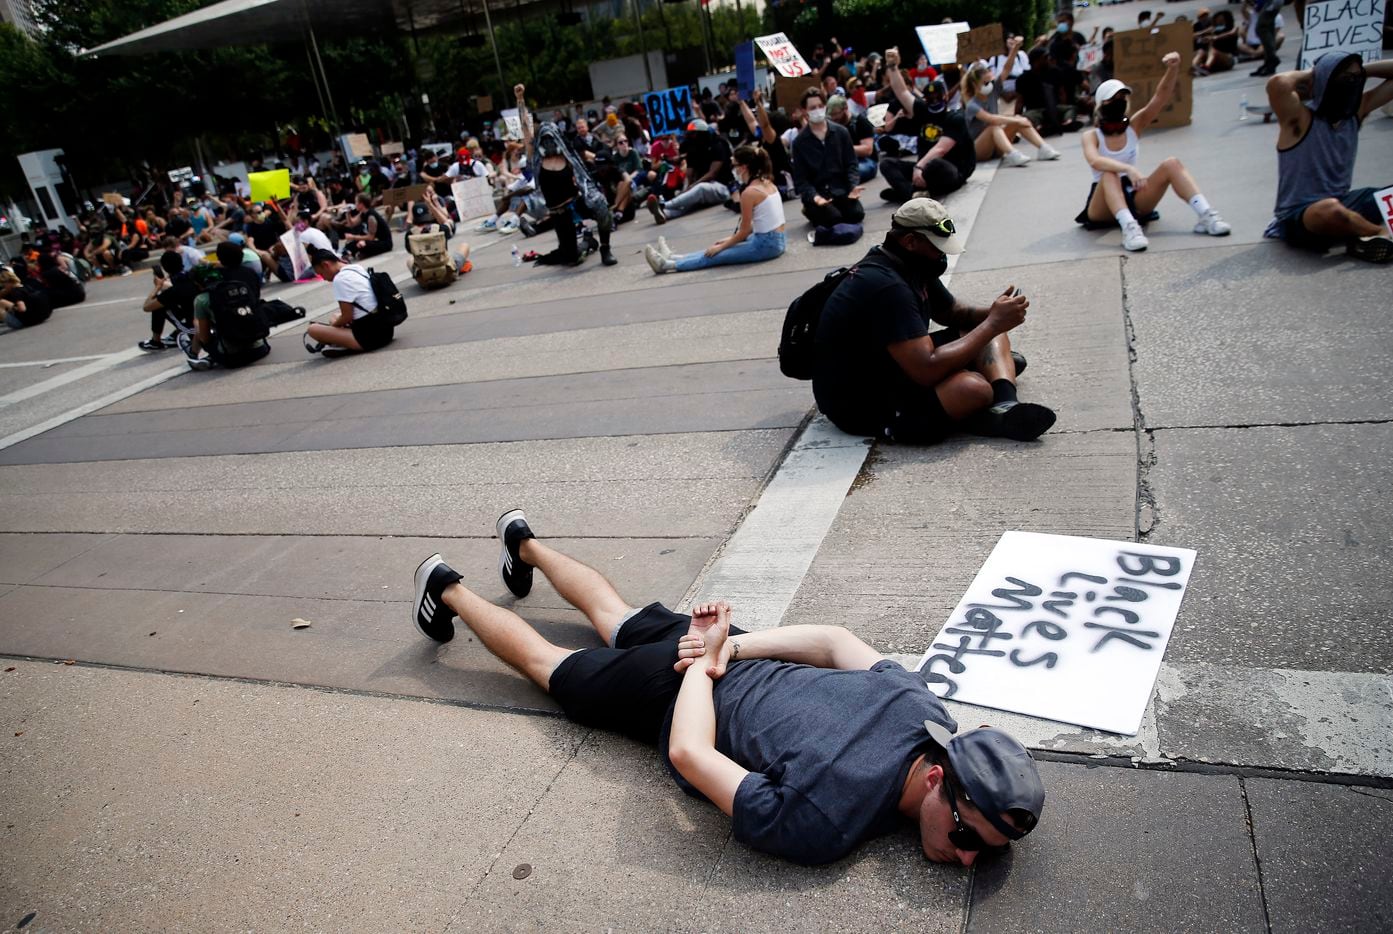 Protestors supporting Black Lives Matters block an intersection at Klyde Warren Park for 8 minutes and 46 seconds, the time it took for the in-custody death of George Floyd. The march wound through downtown Dallas, Tuesday, June 2, 2020.